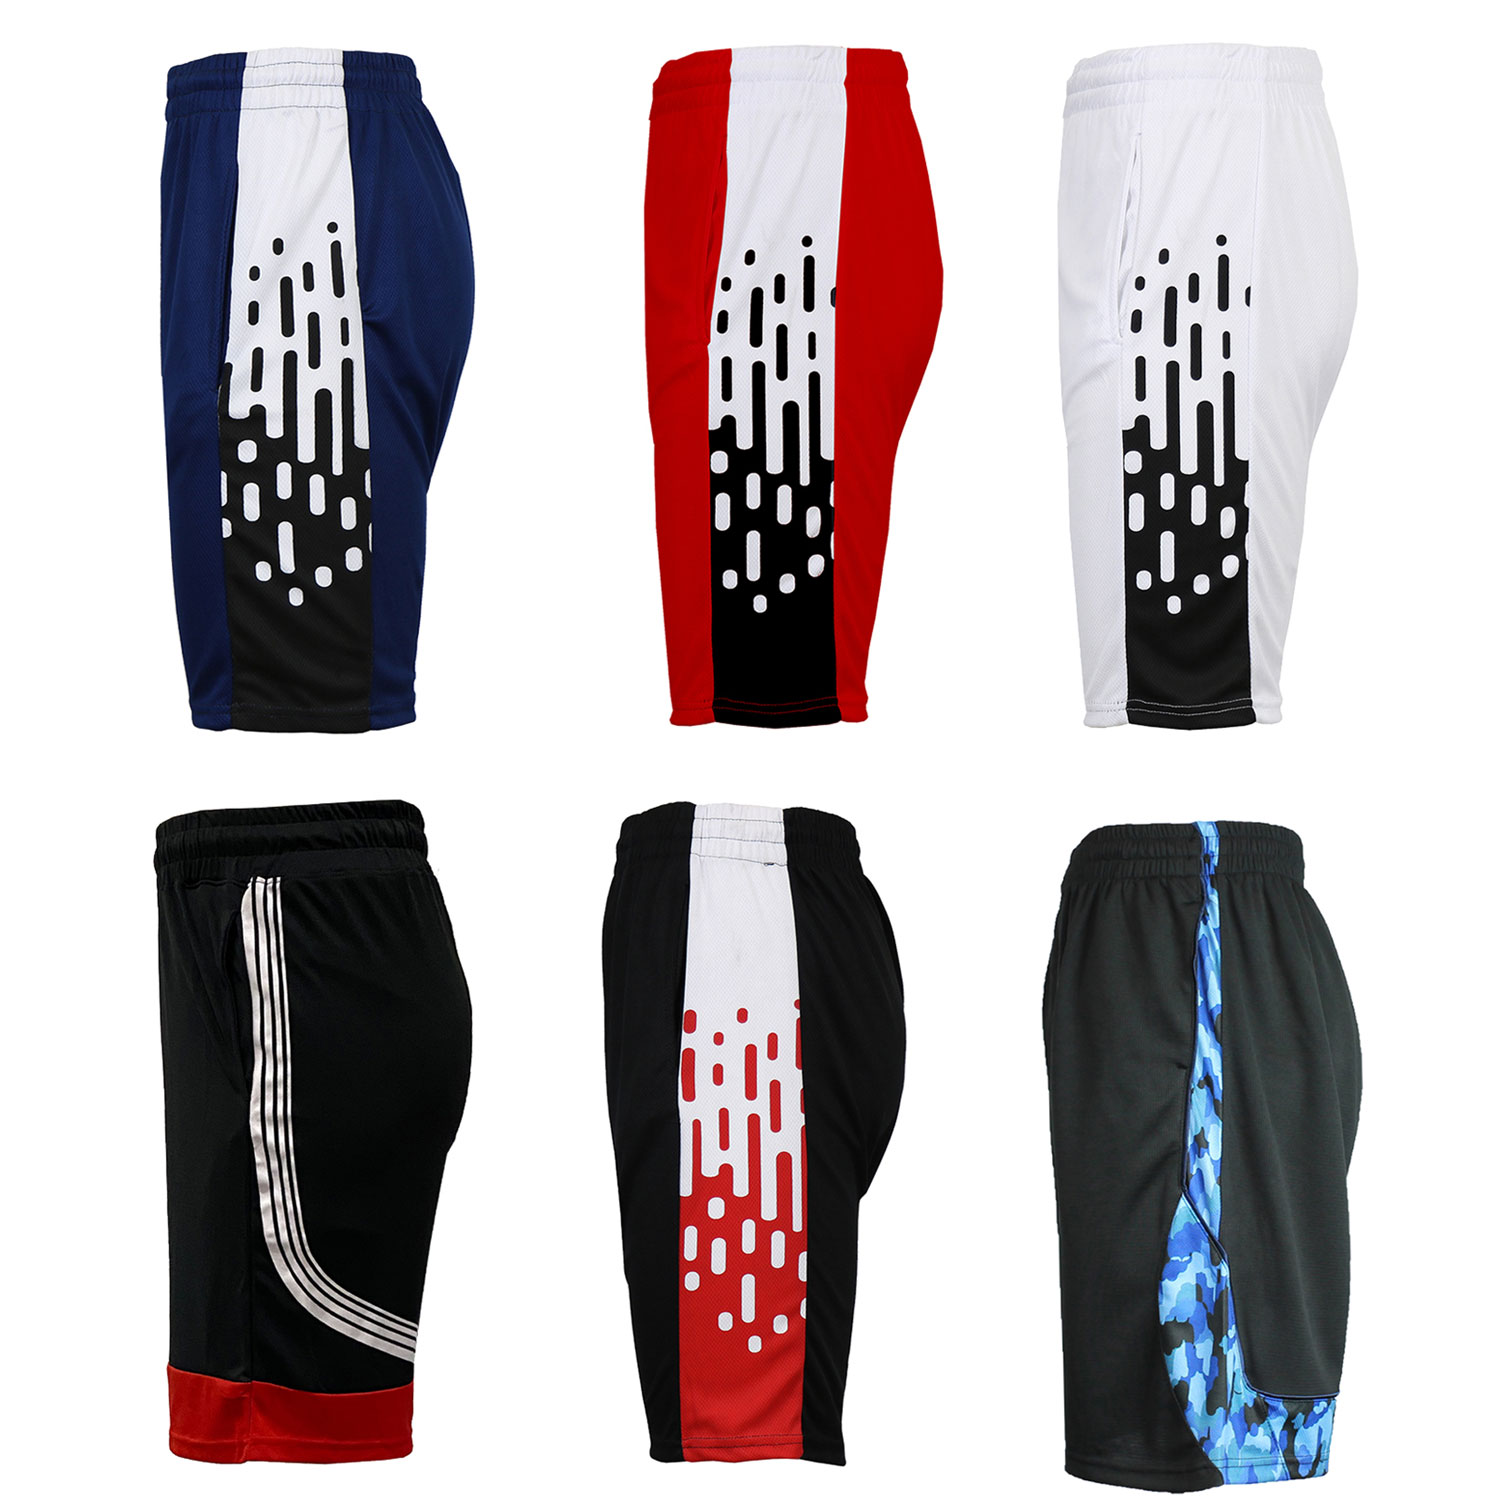 5-pack Men's Moisture Wicking Assorted Active Mesh Shorts